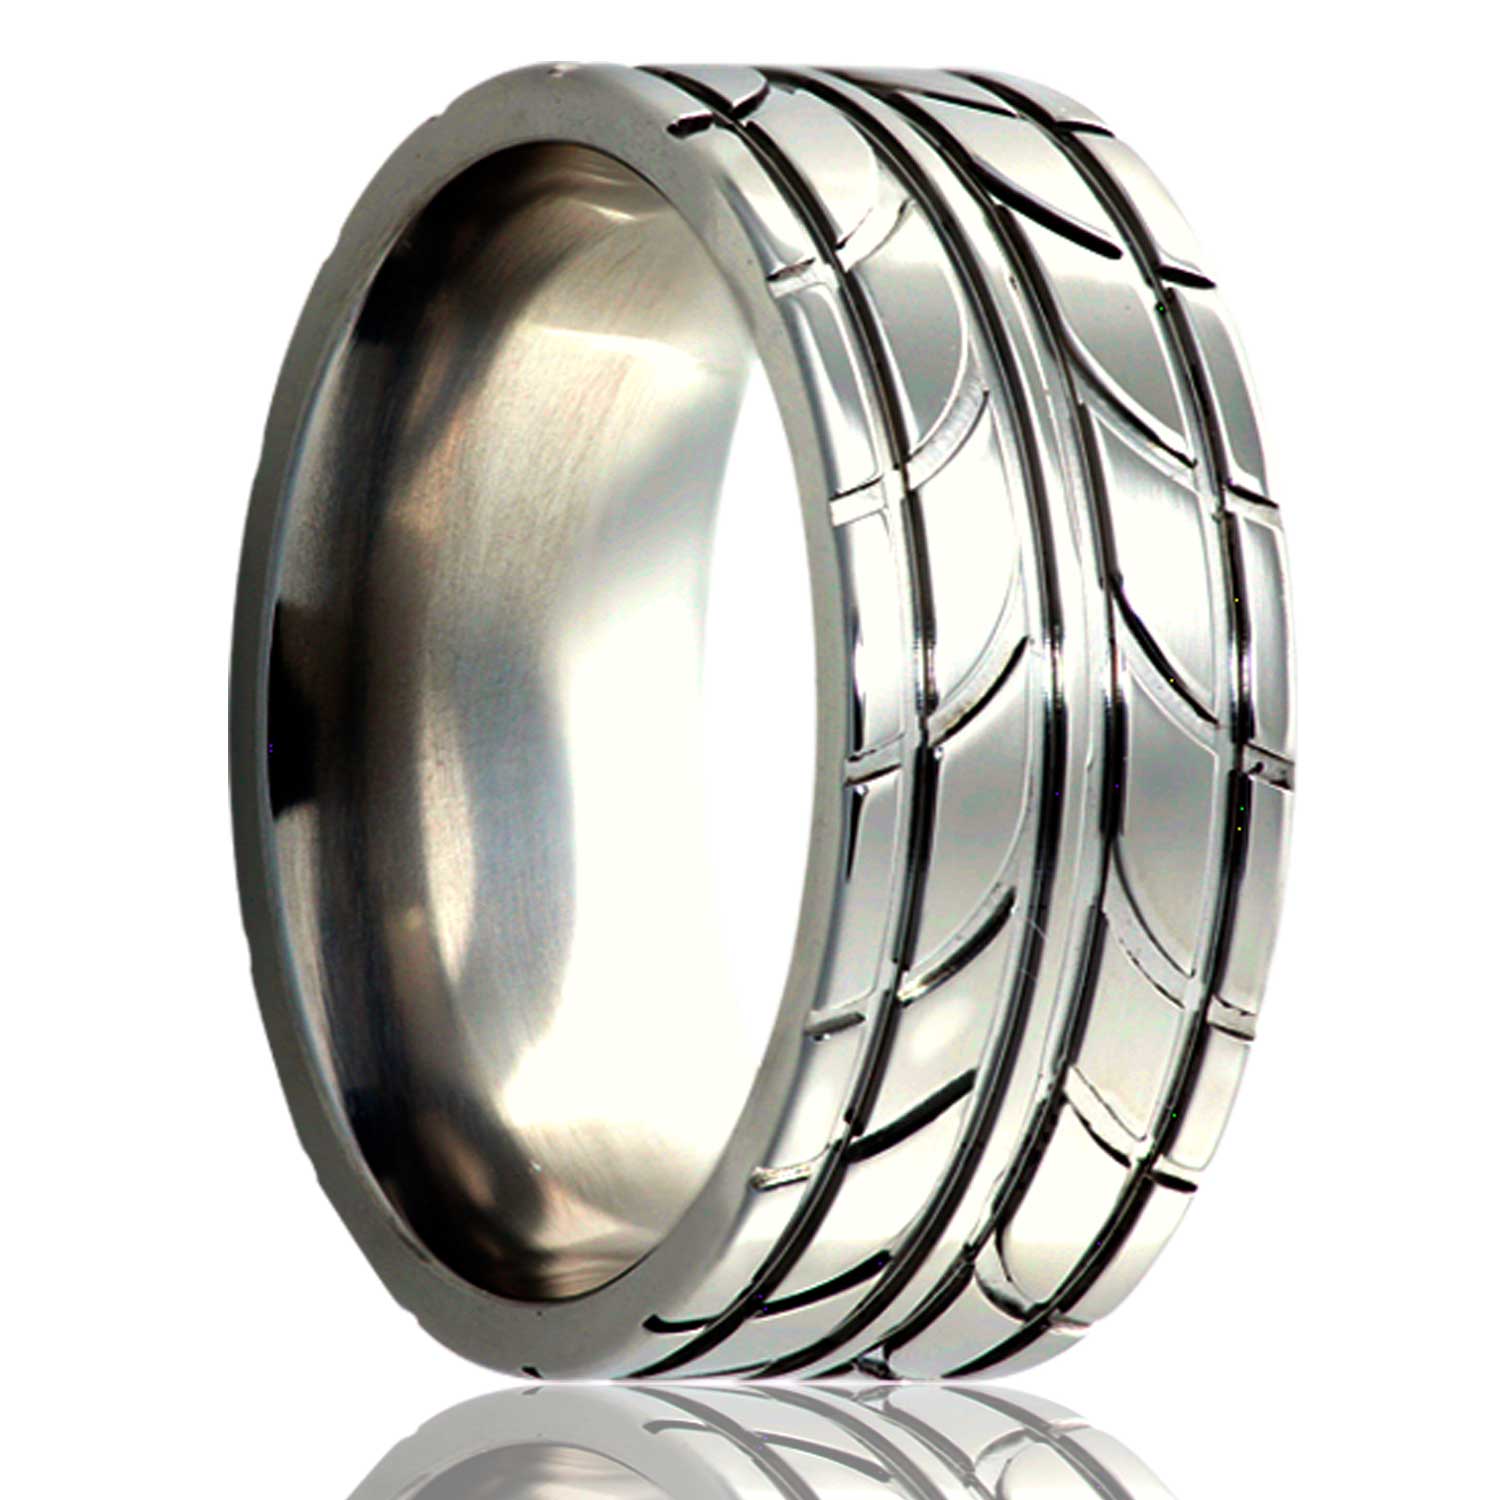 A tire treads titanium men's wedding band displayed on a neutral white background.